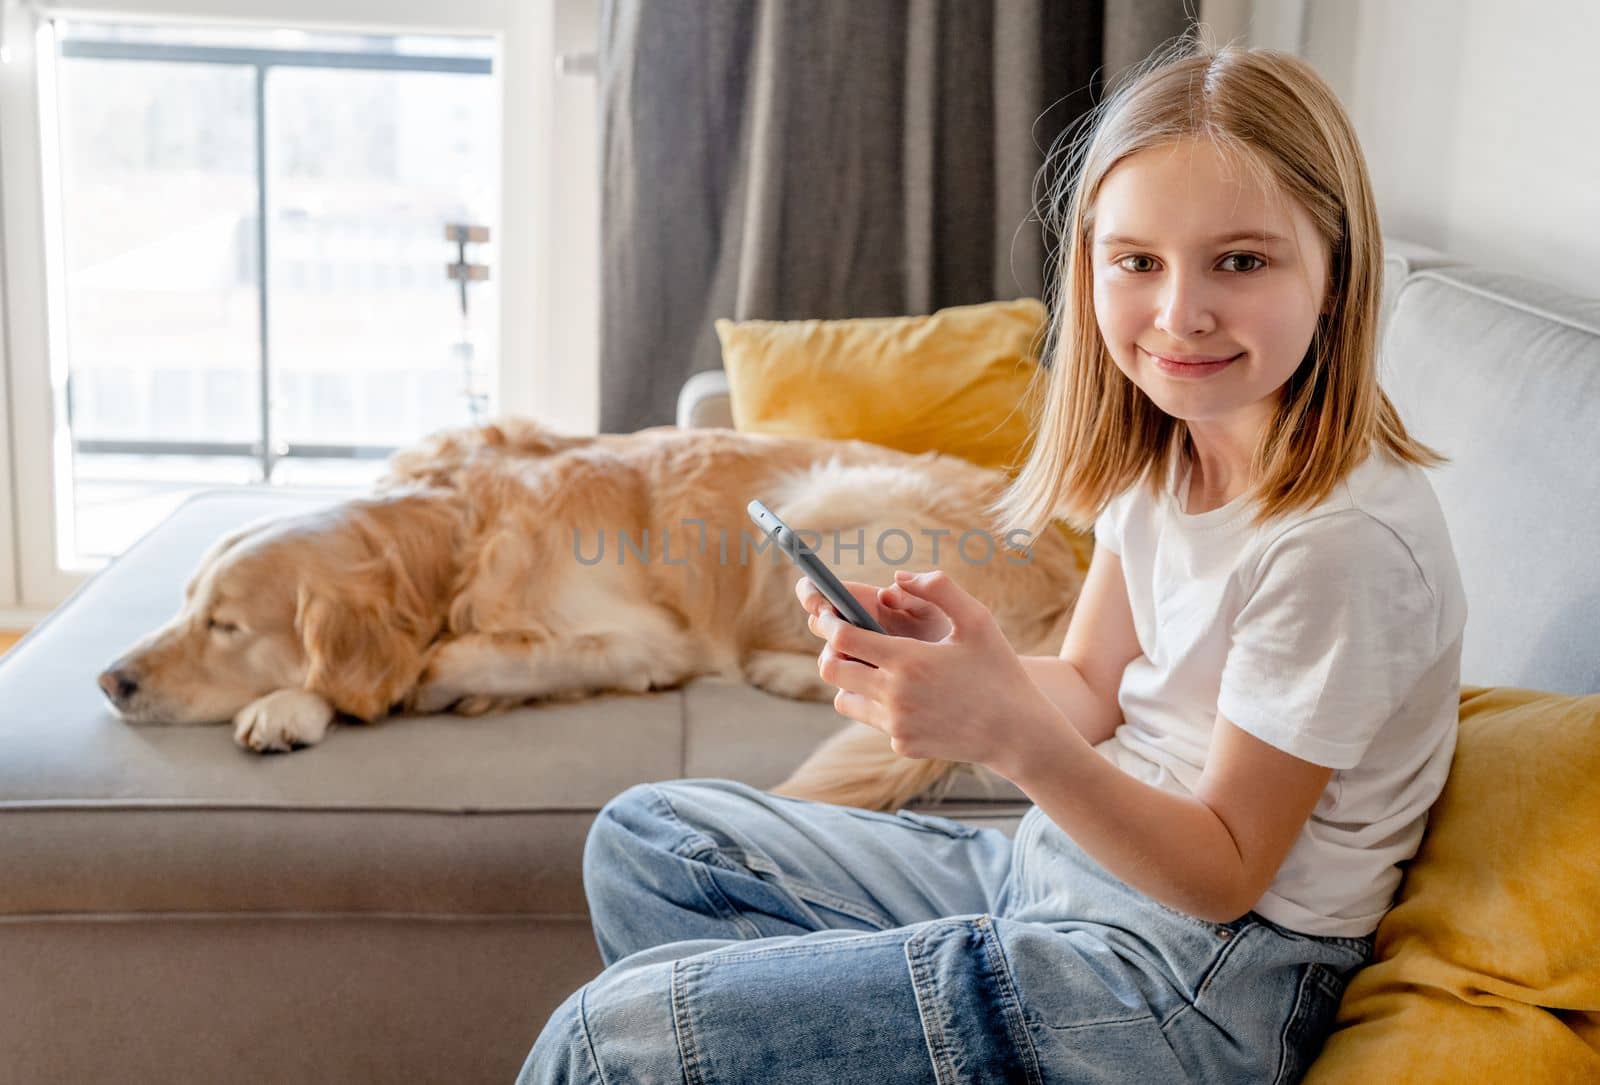 Preteen girl with golden retriever at home by tan4ikk1